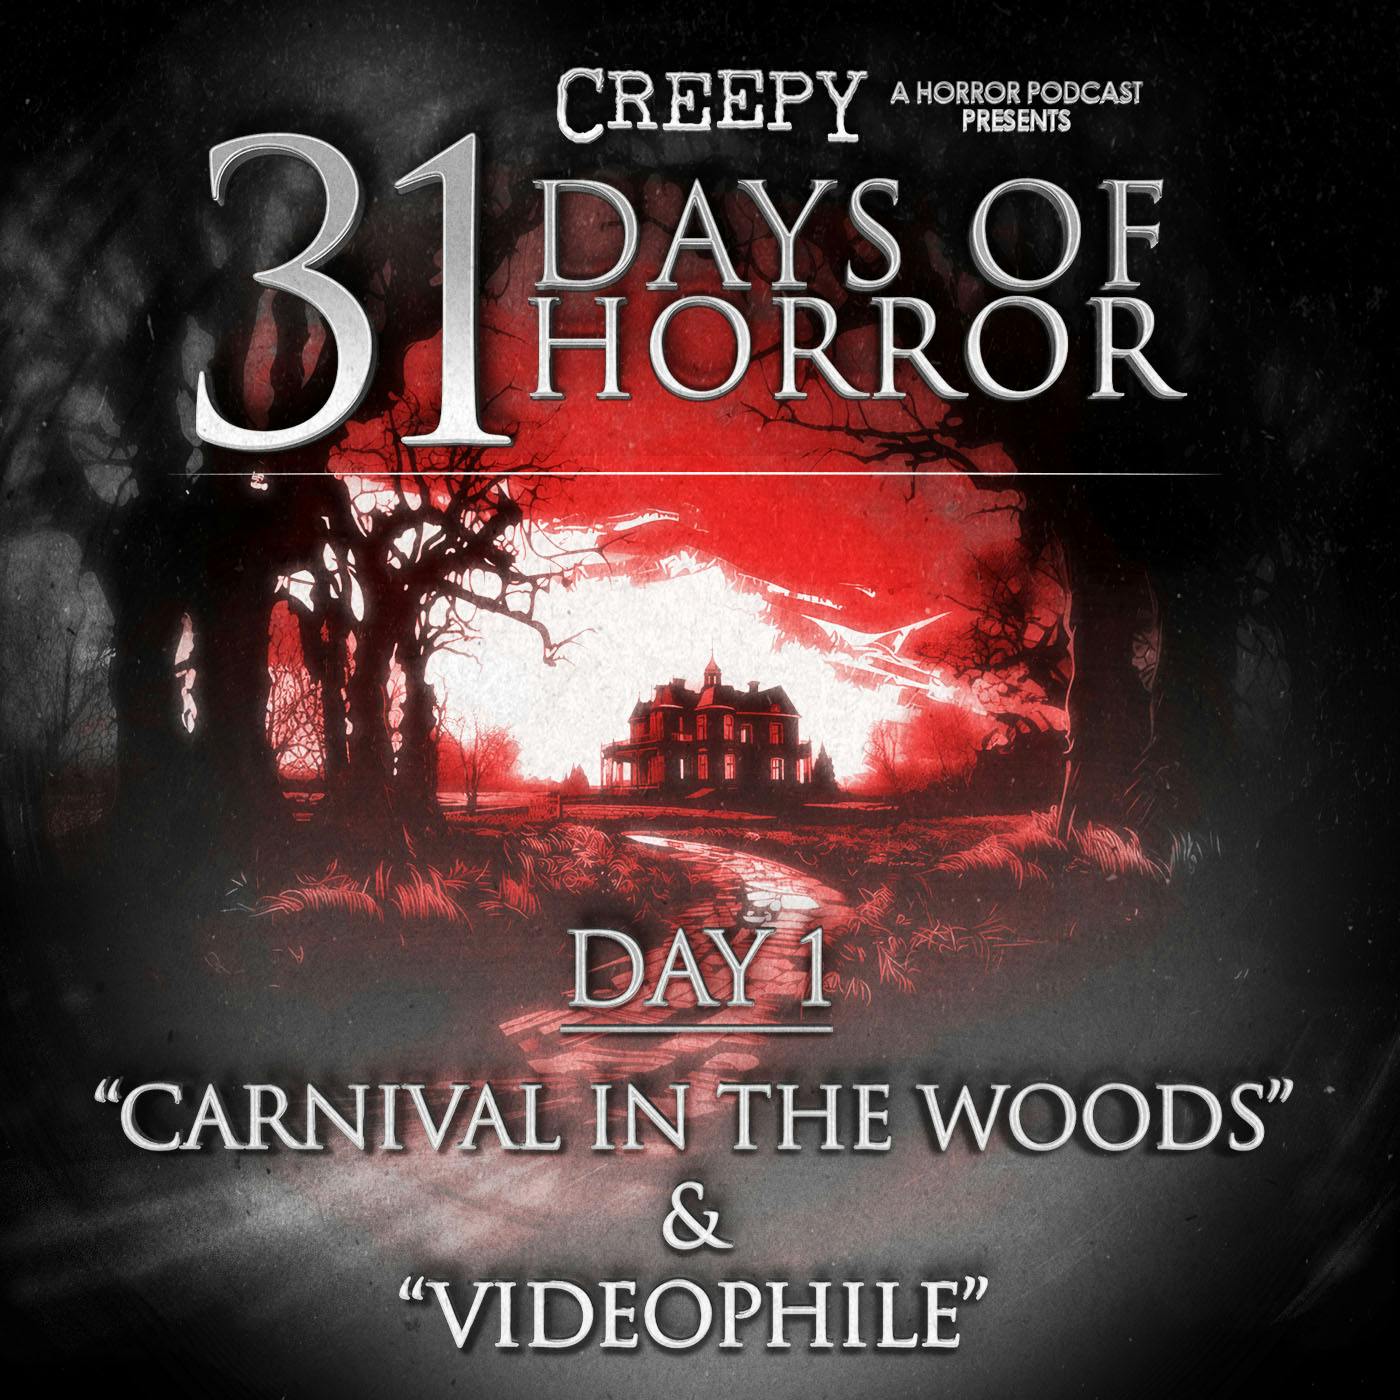 Day 1 - A Carnival in the Woods & Videophile